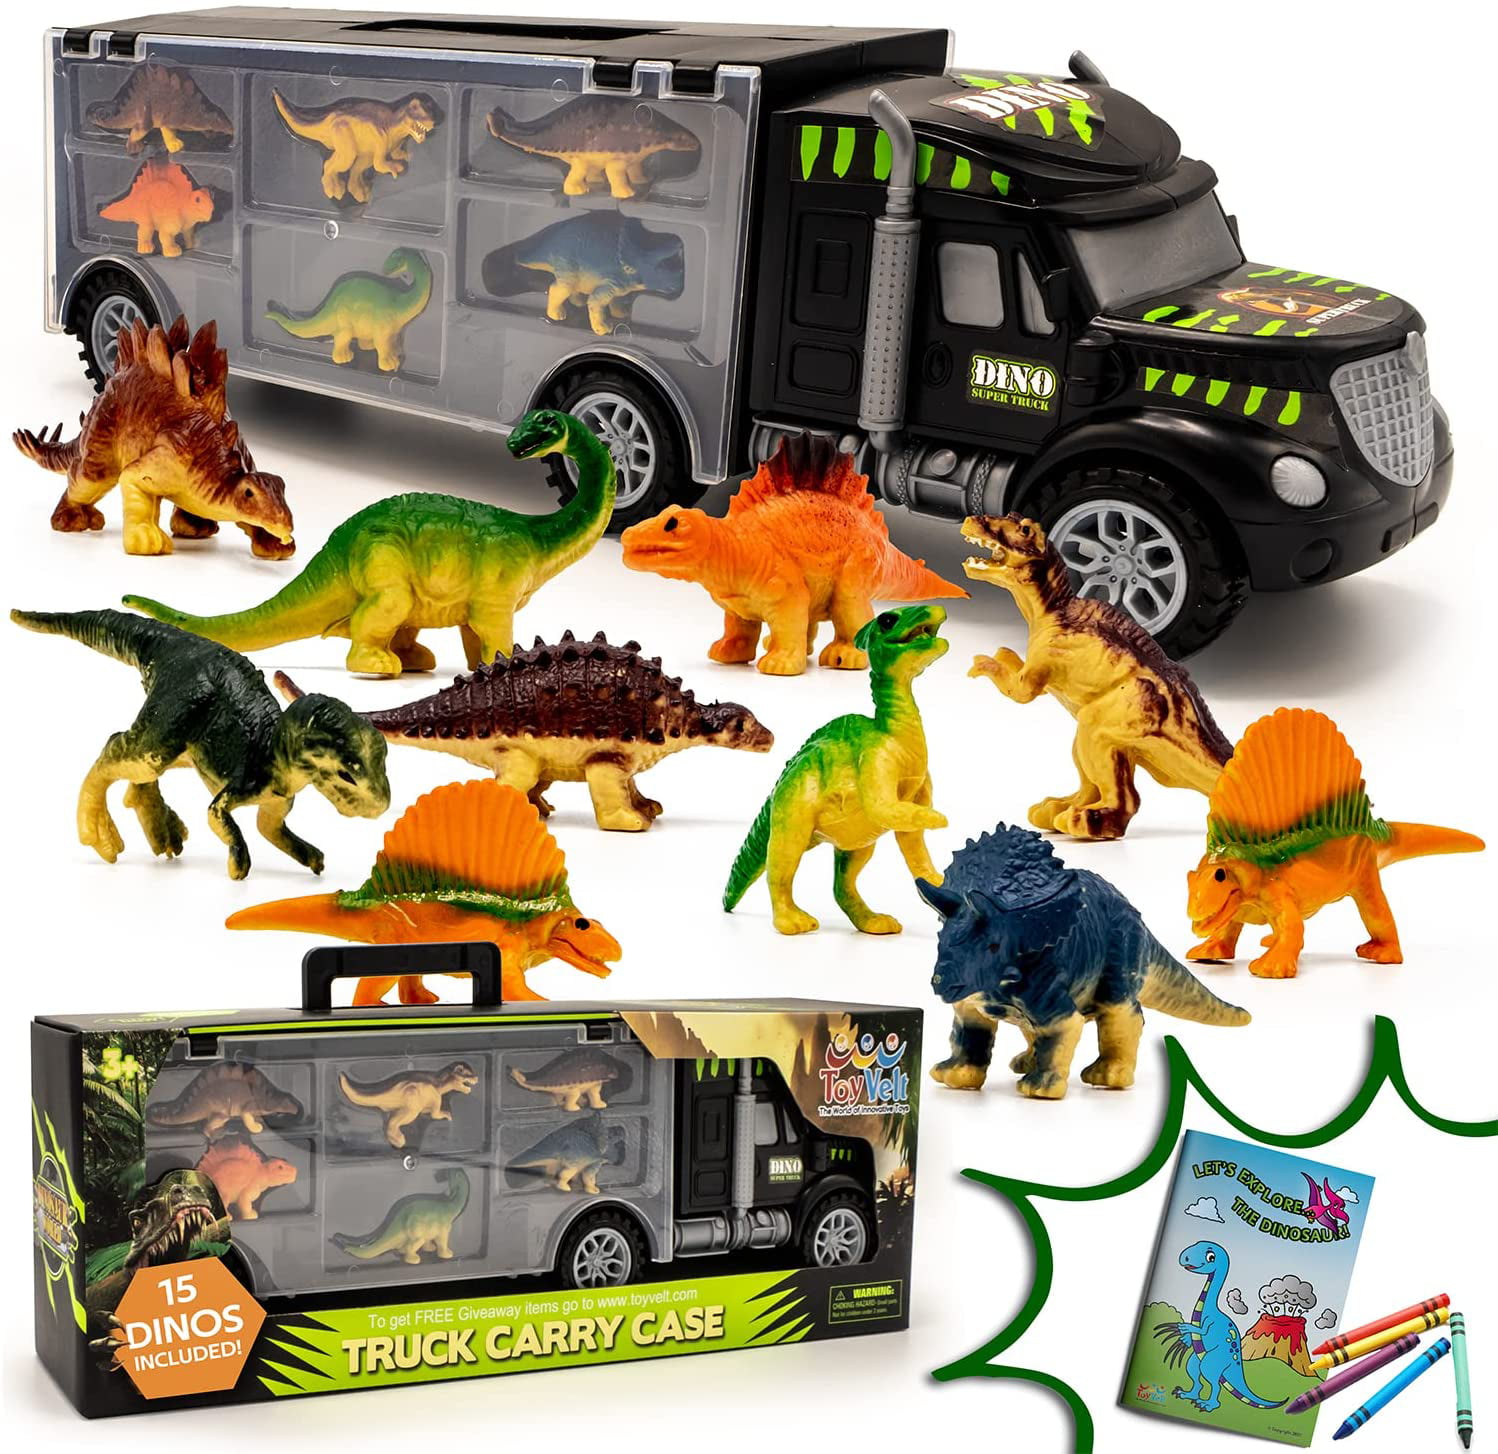 Dinosaur Toys with Truck Carrier Jurassic World Dinosaur Toys with 6 Dinosaurs 6 Animals and Double Sides Storage Truck Car Toys Jurassic Dinosaur Toys Gift for 3 4 5 6 7 Years Old Boys Girls